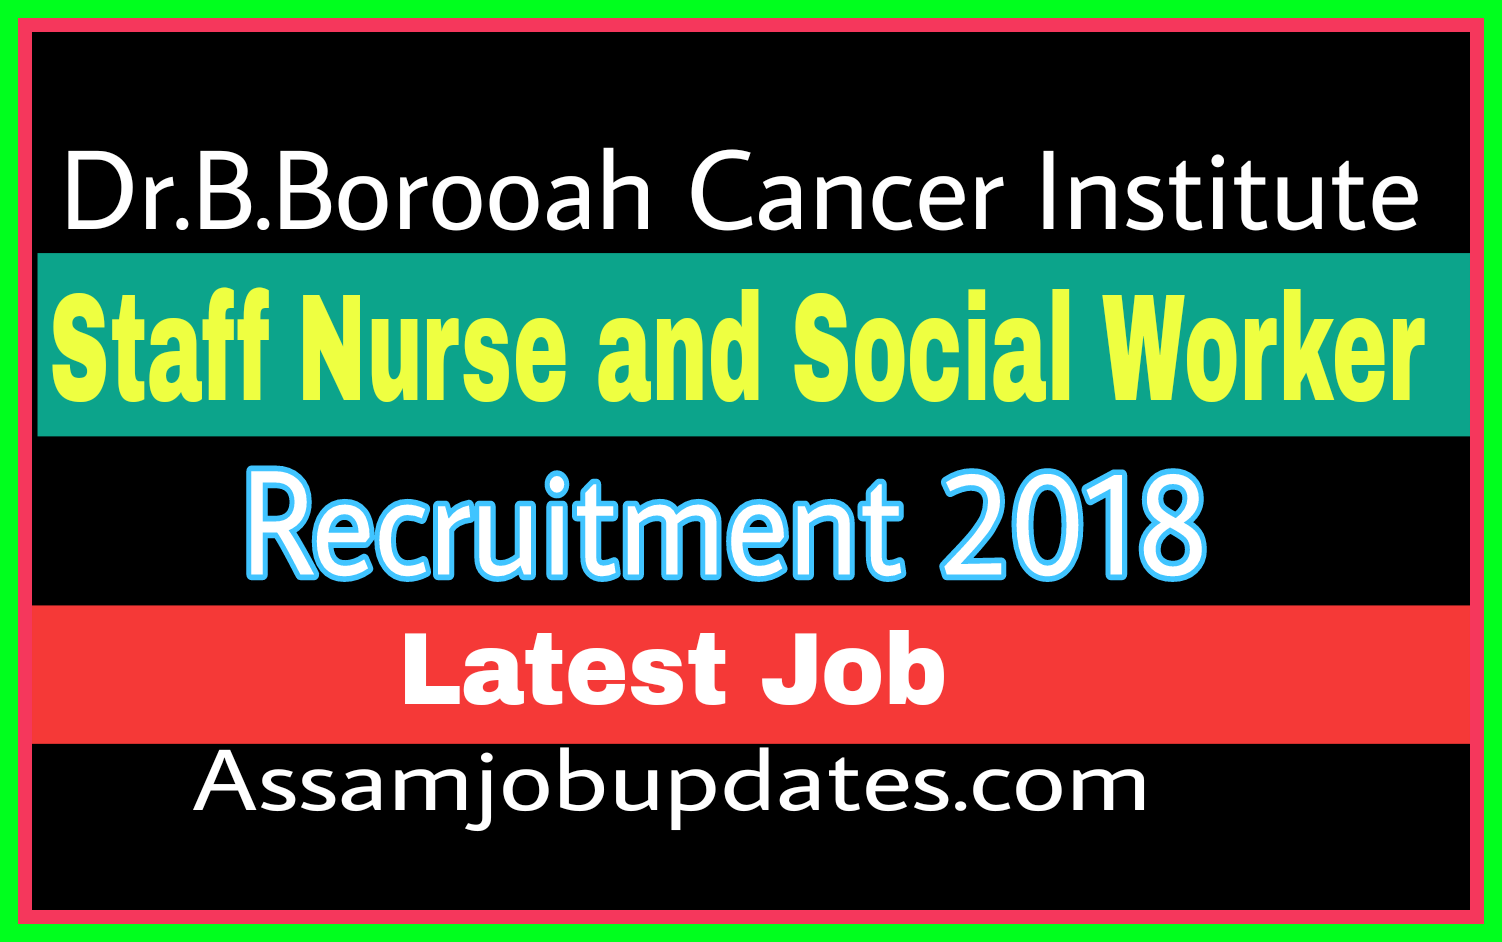  Dr. B.Borooah Cancer Institute Recruitment Staff Nurse and Social Worker